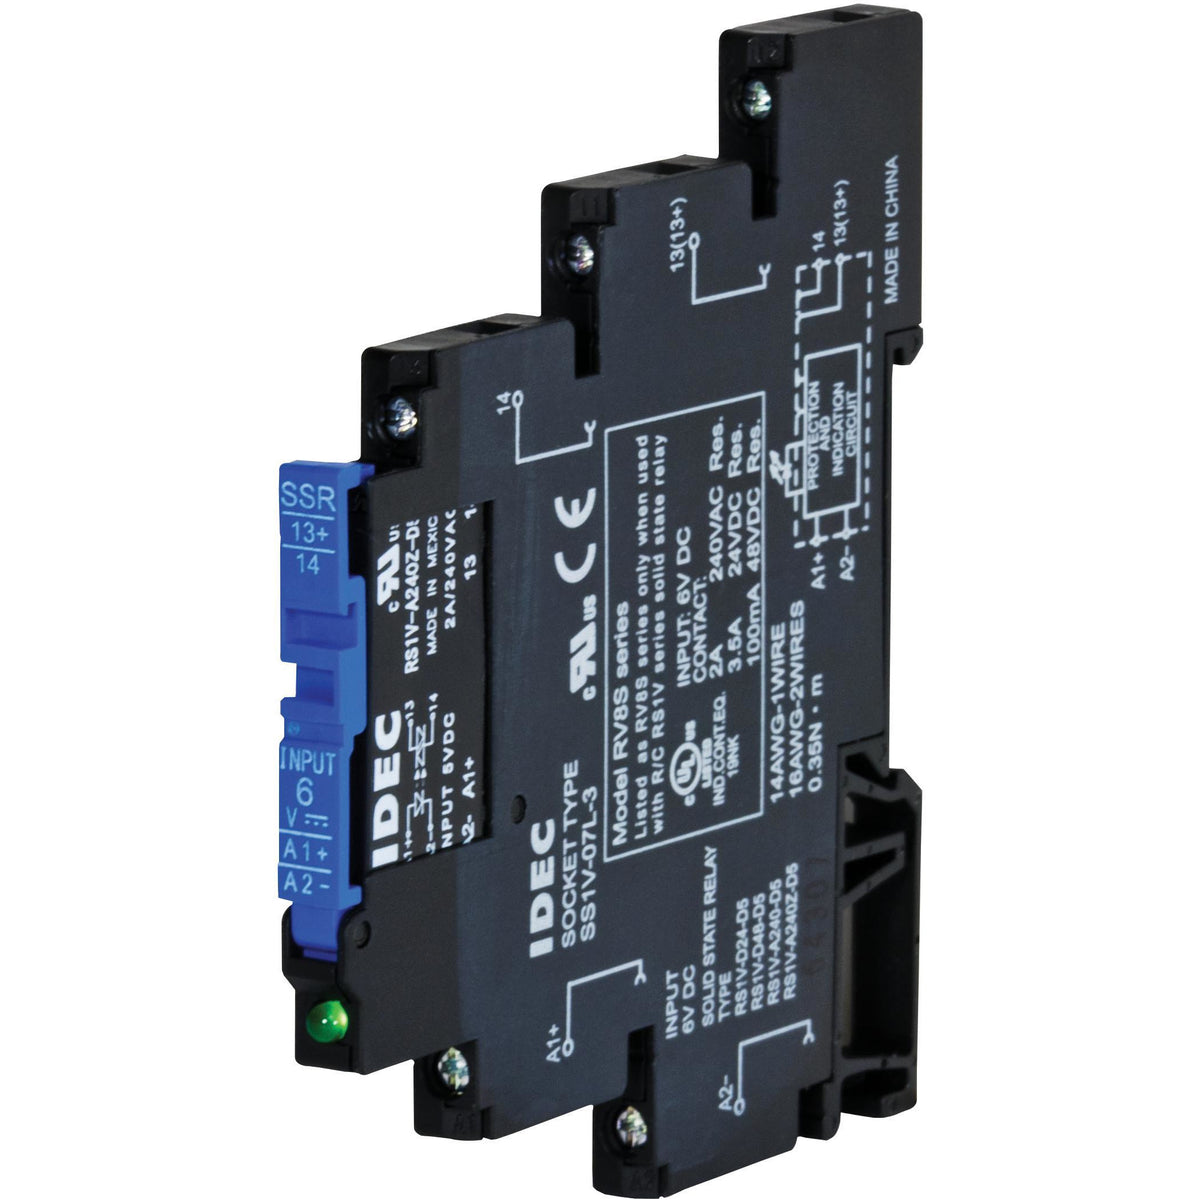 Black plastic housing that connects to a din rail.